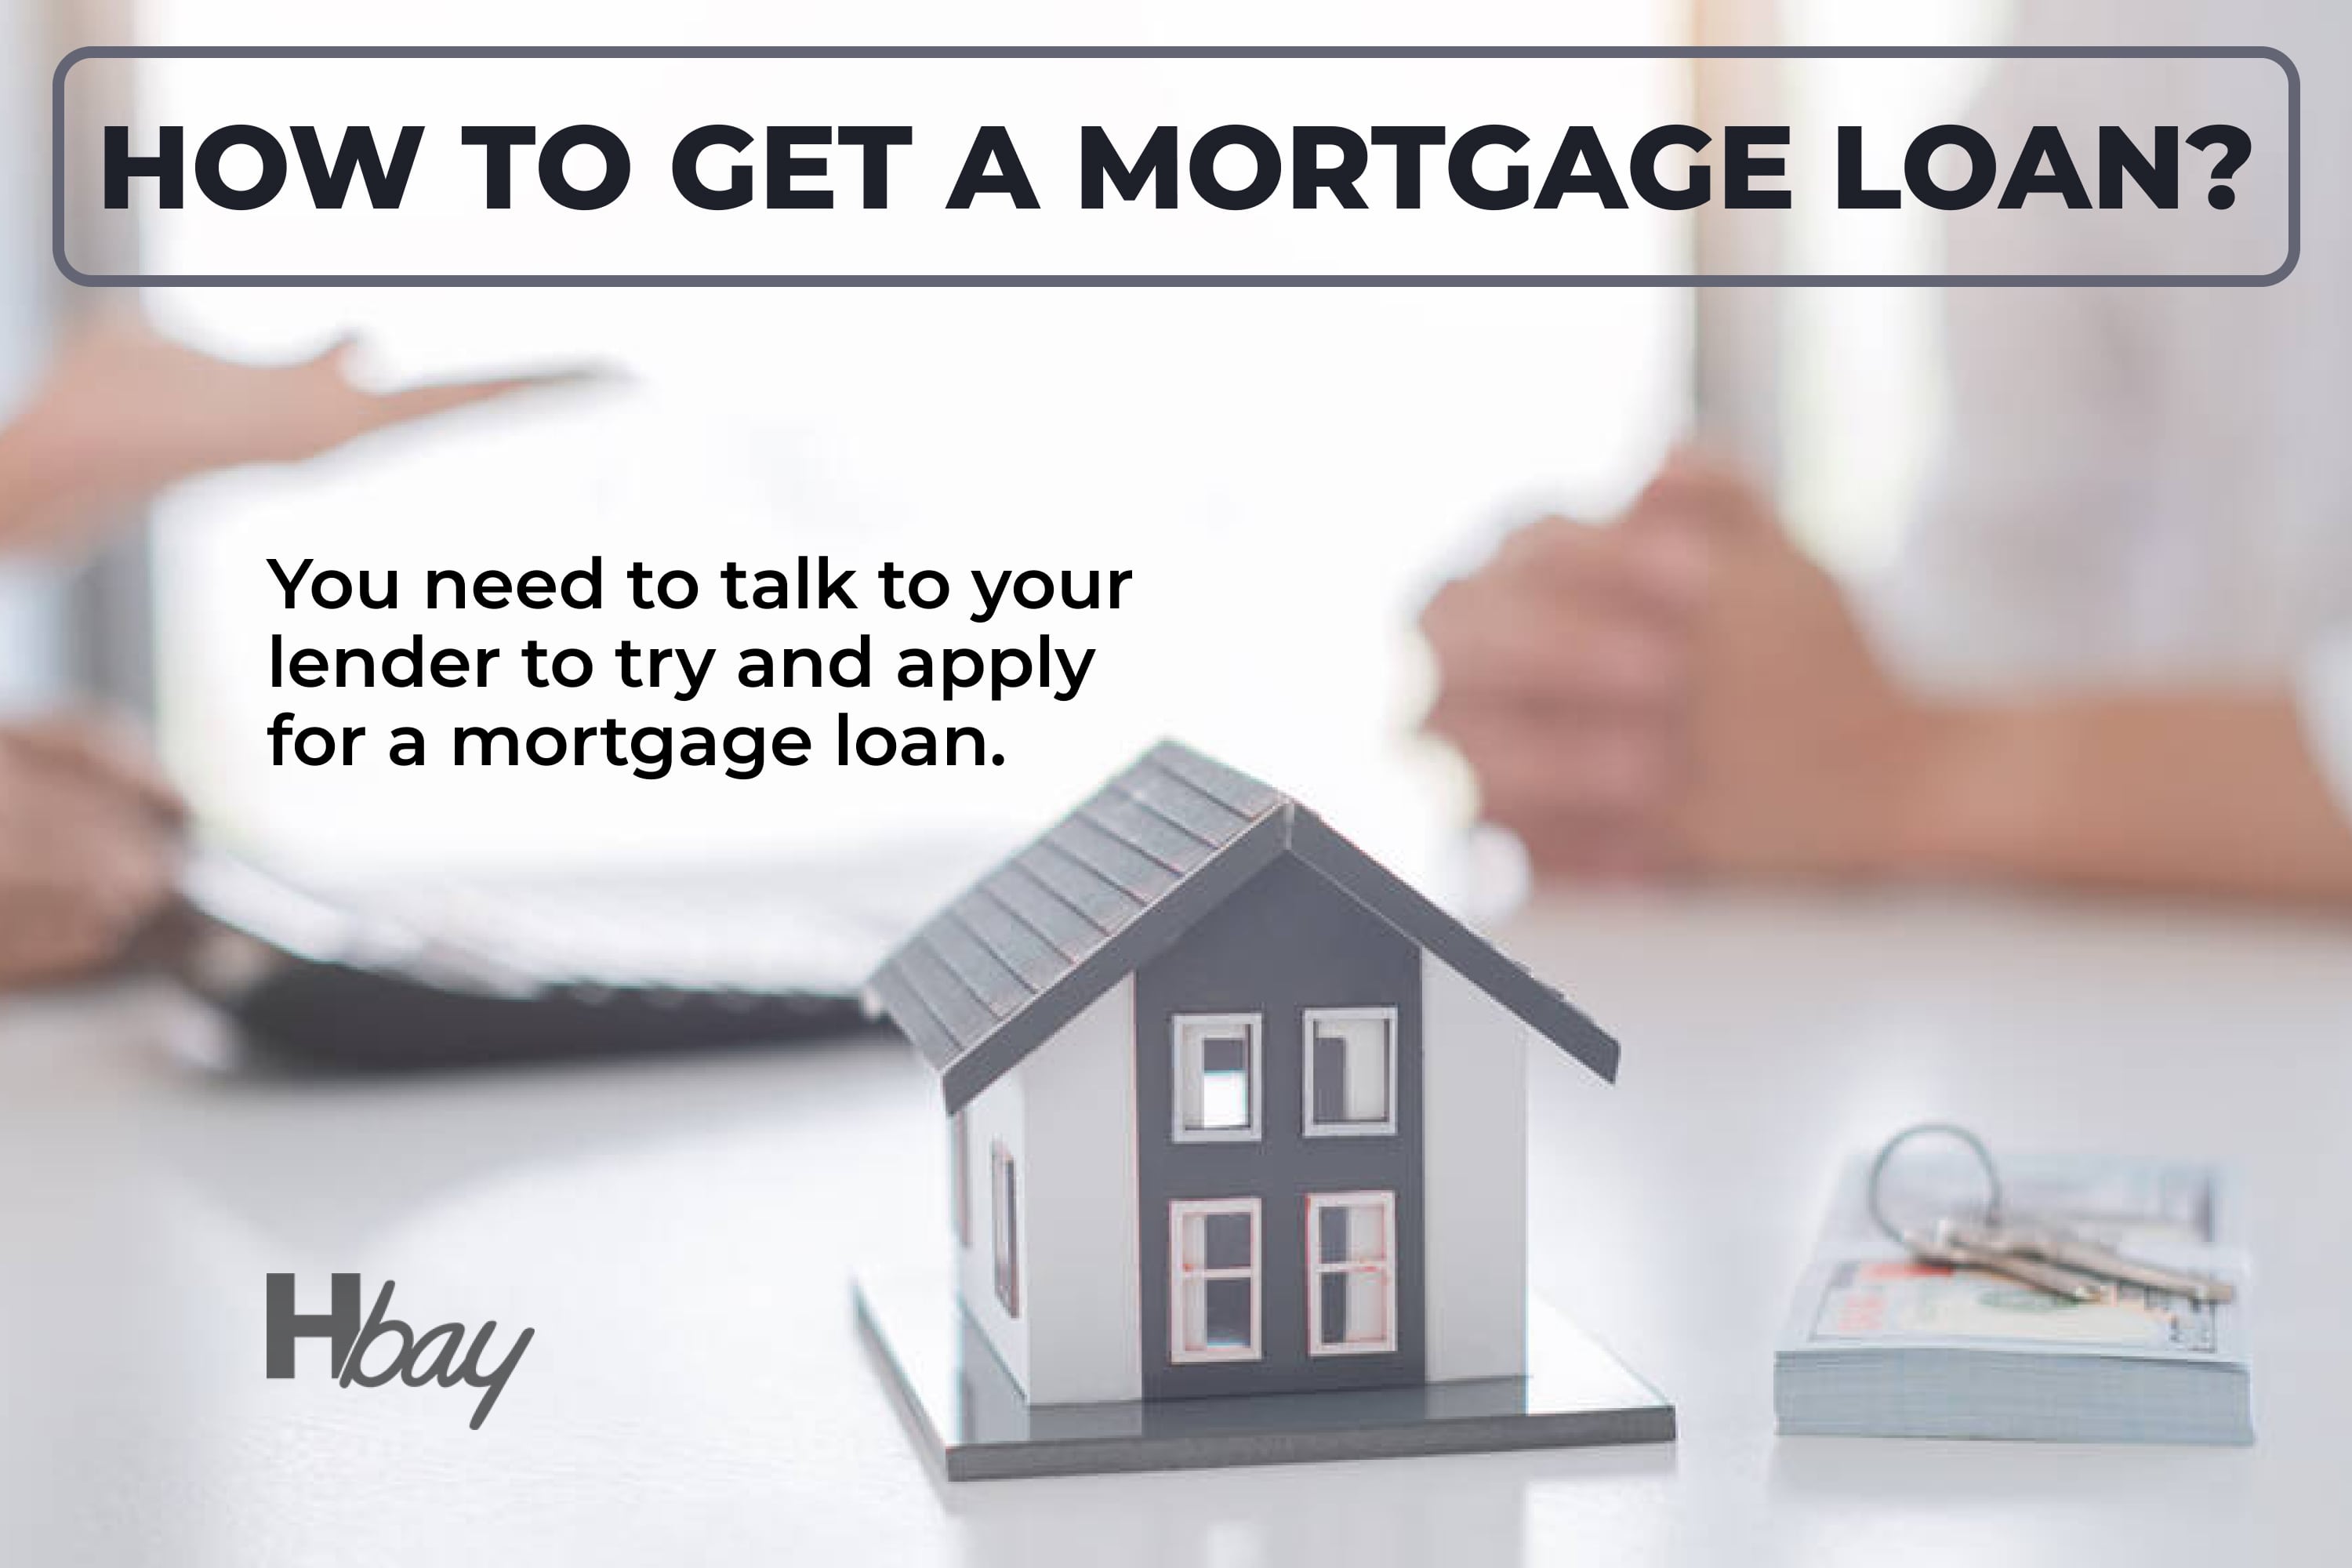 How to get a mortgage loan